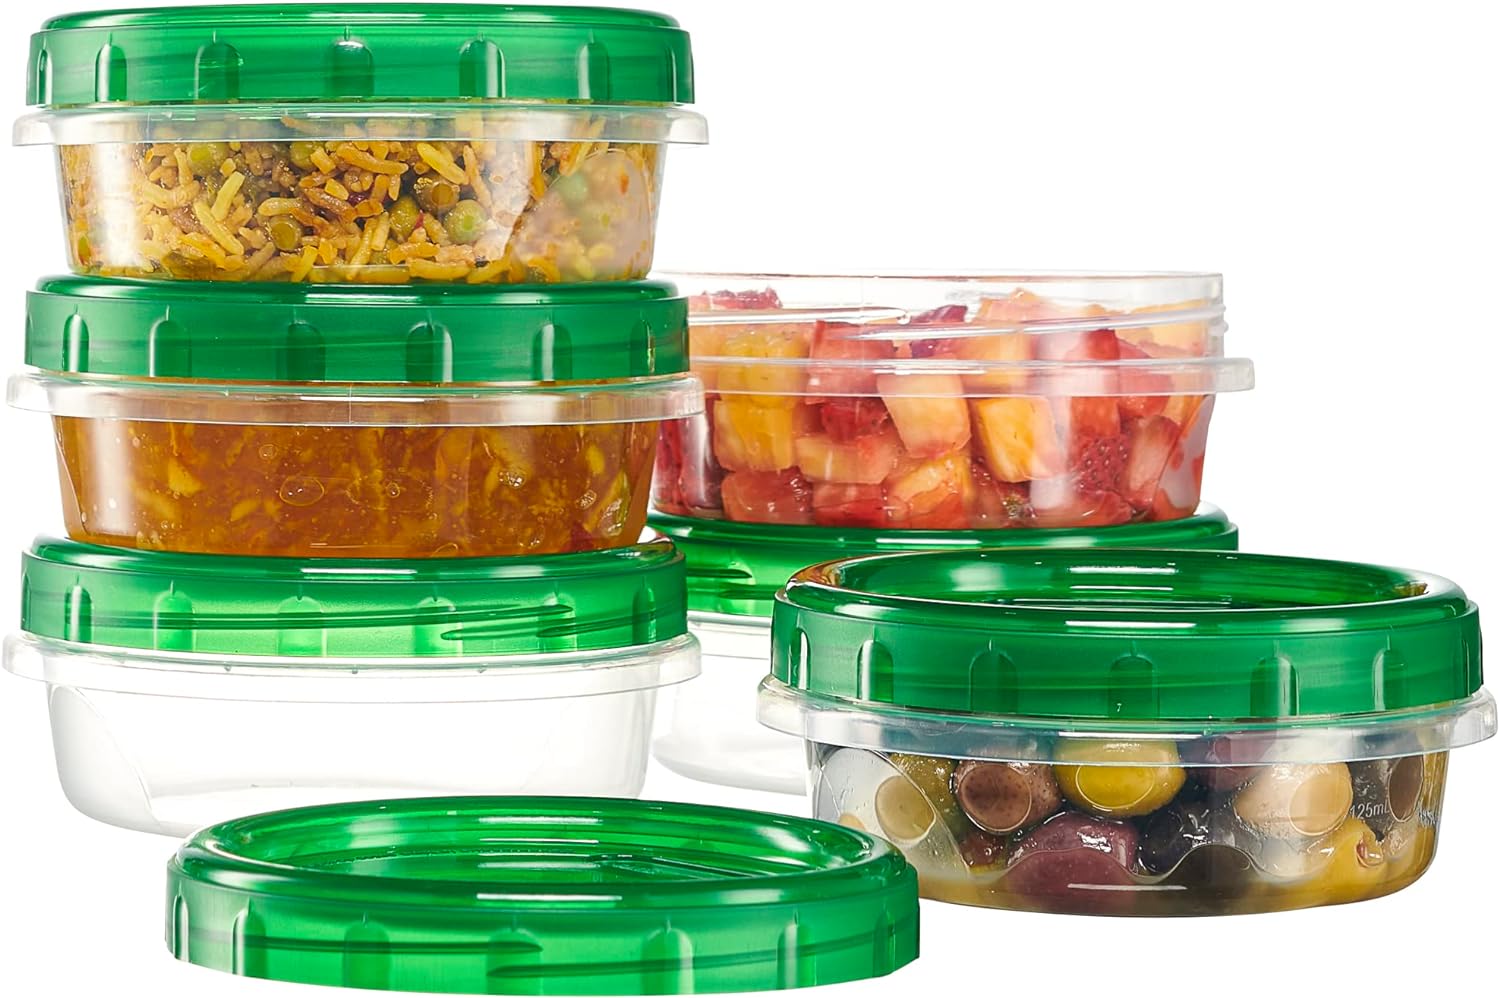 PLASTICPRO 6 Pack Twist Cap Food Storage Containers with Green Screw on Lid- 8 oz Reusable Meal Prep Containers - Freezer and Microwave Safe Green Plastic Food Storage